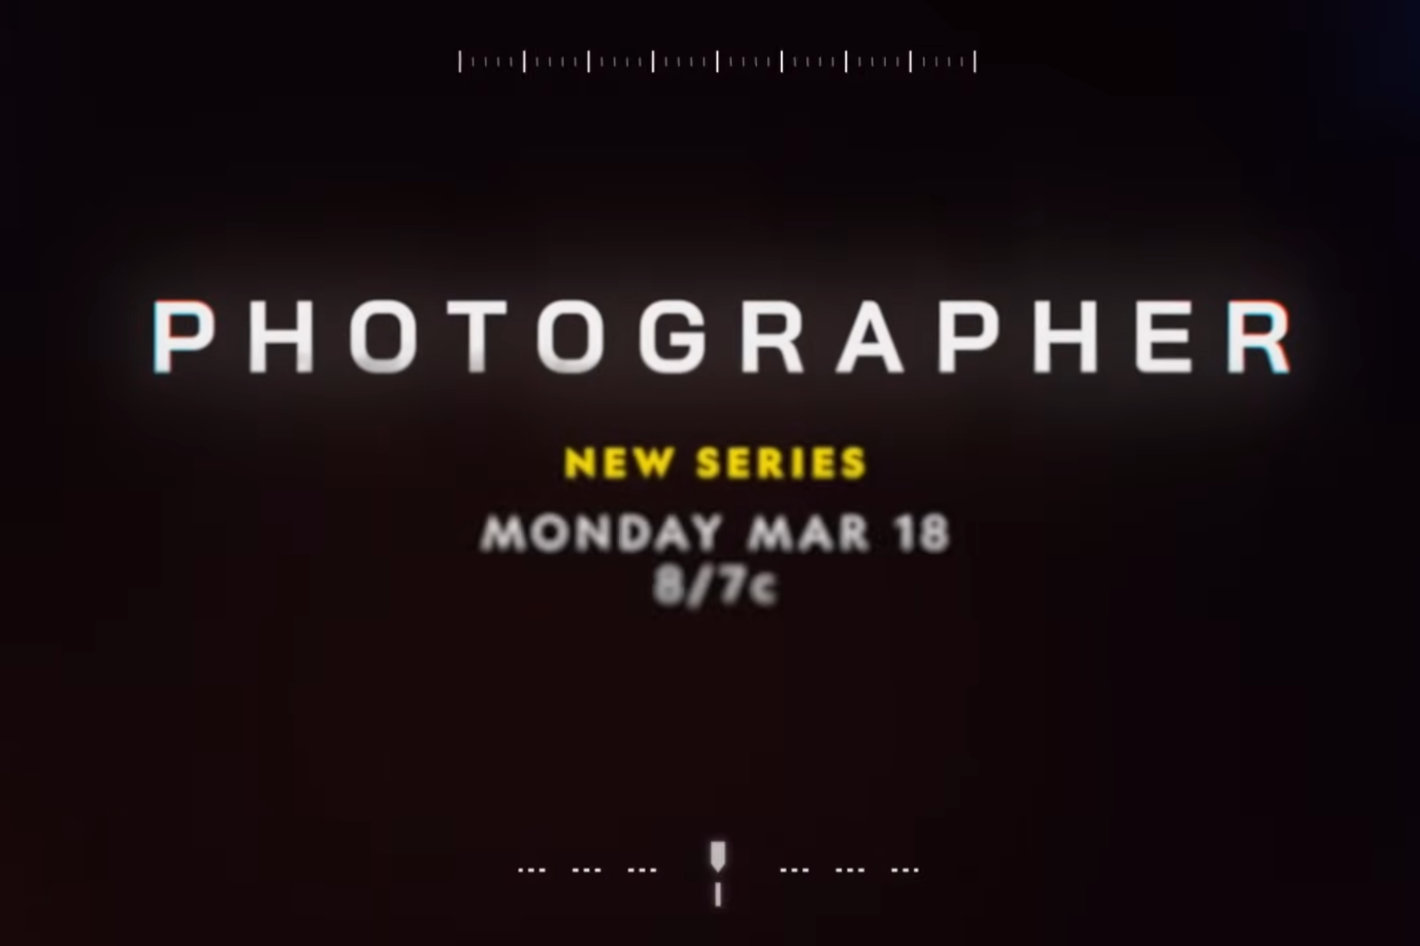 PHOTOGRAPHER: new National Geographic series premieres March 18